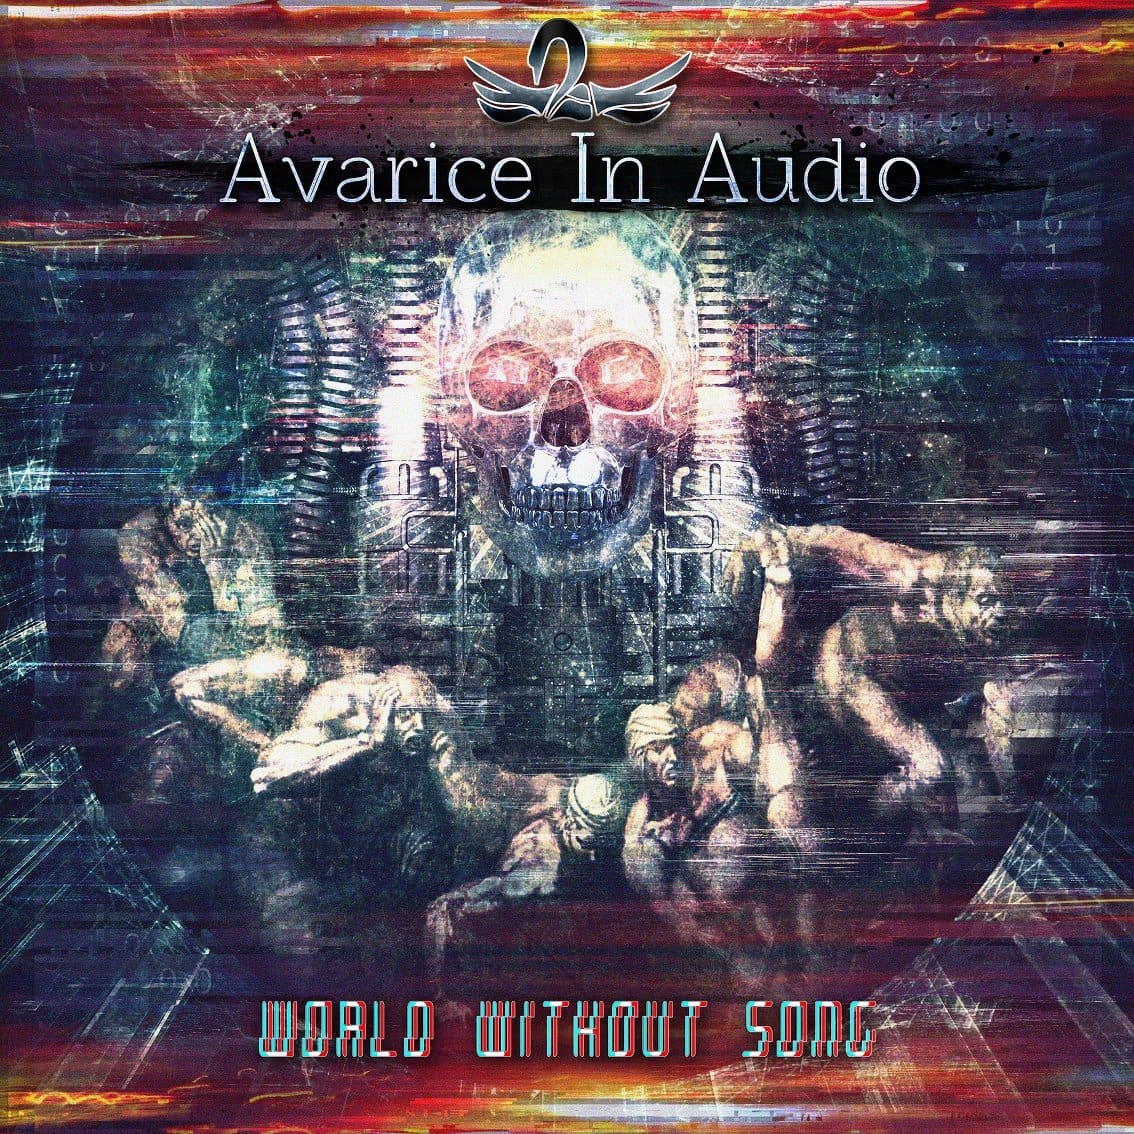 Avarice In Audio hits back with 'World Without Song' download EP